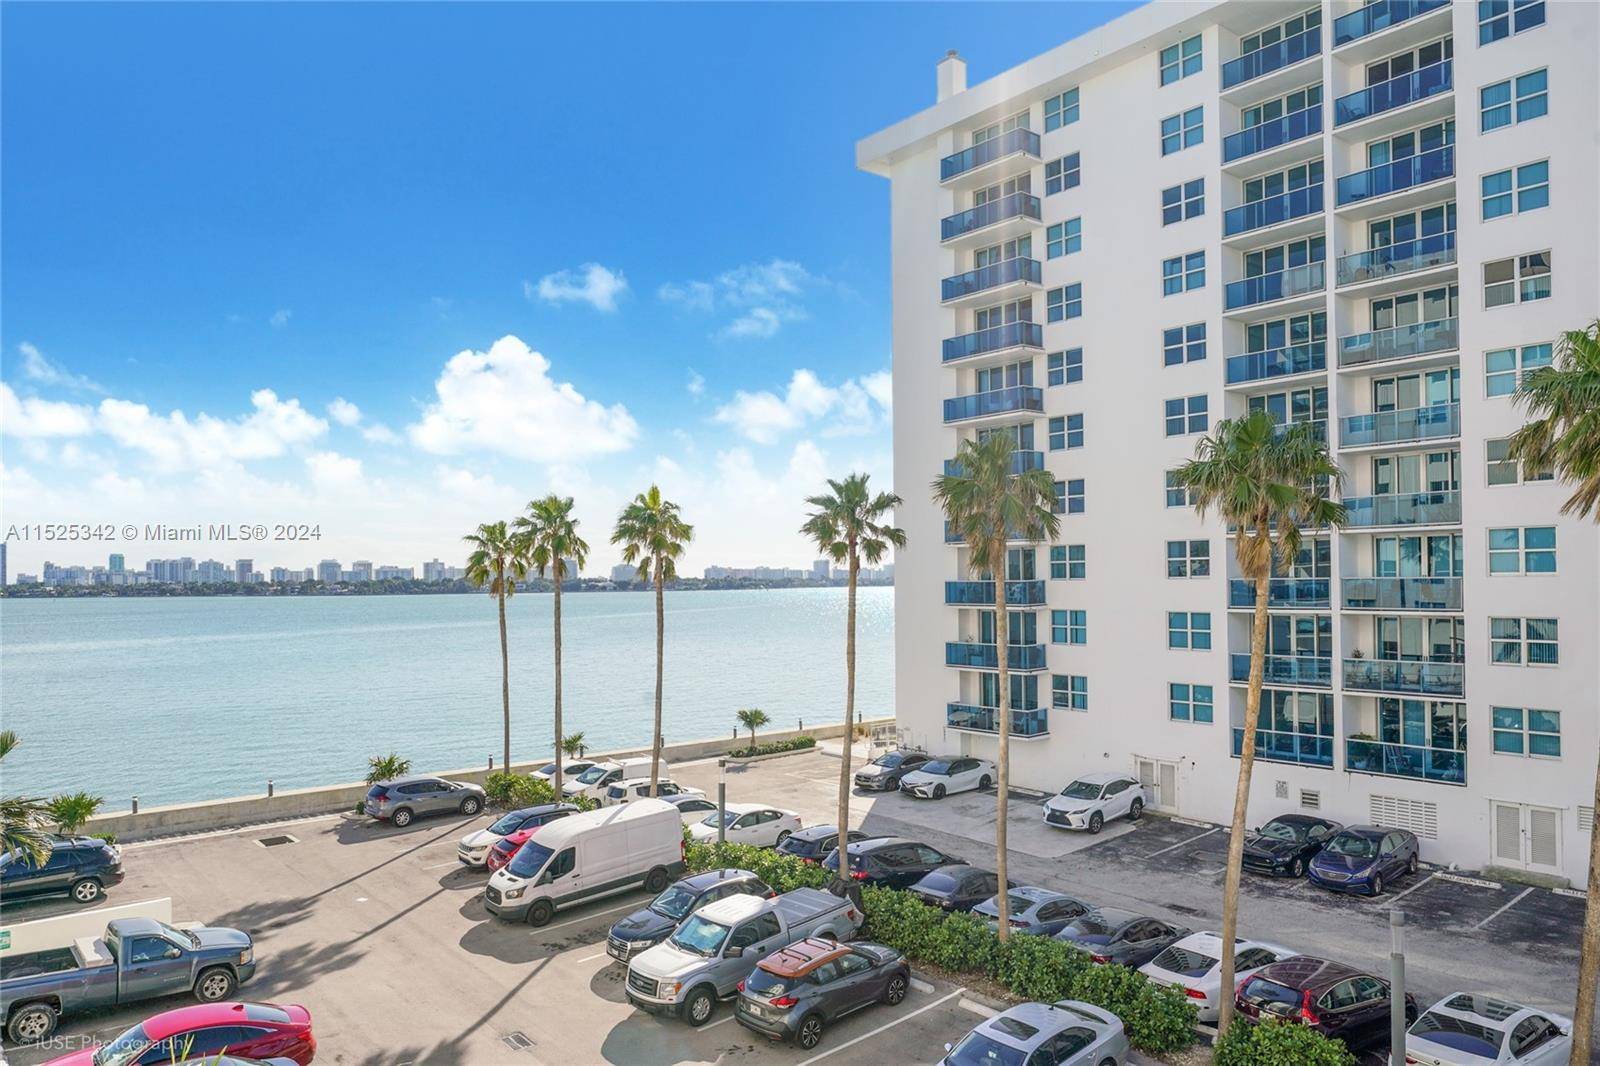 STUNNING WATER AND CITY VIEWS FROM THIS SPACIOUS 1 BEDROOM UNIT SITUATED RIGHT ON THE BAY WITH DIRECT VIEWS !